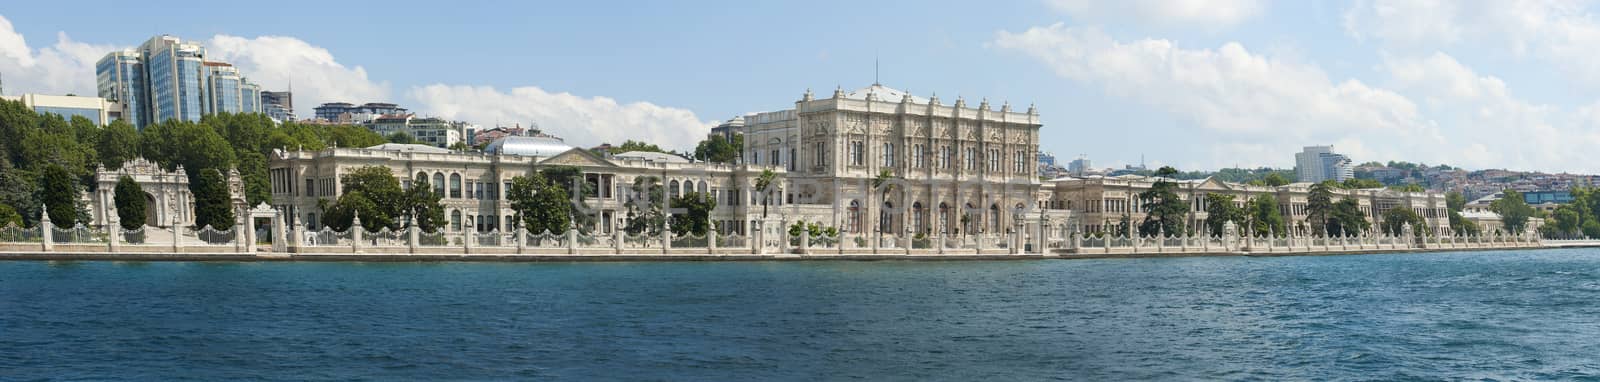 Large palace on a river by paulvinten